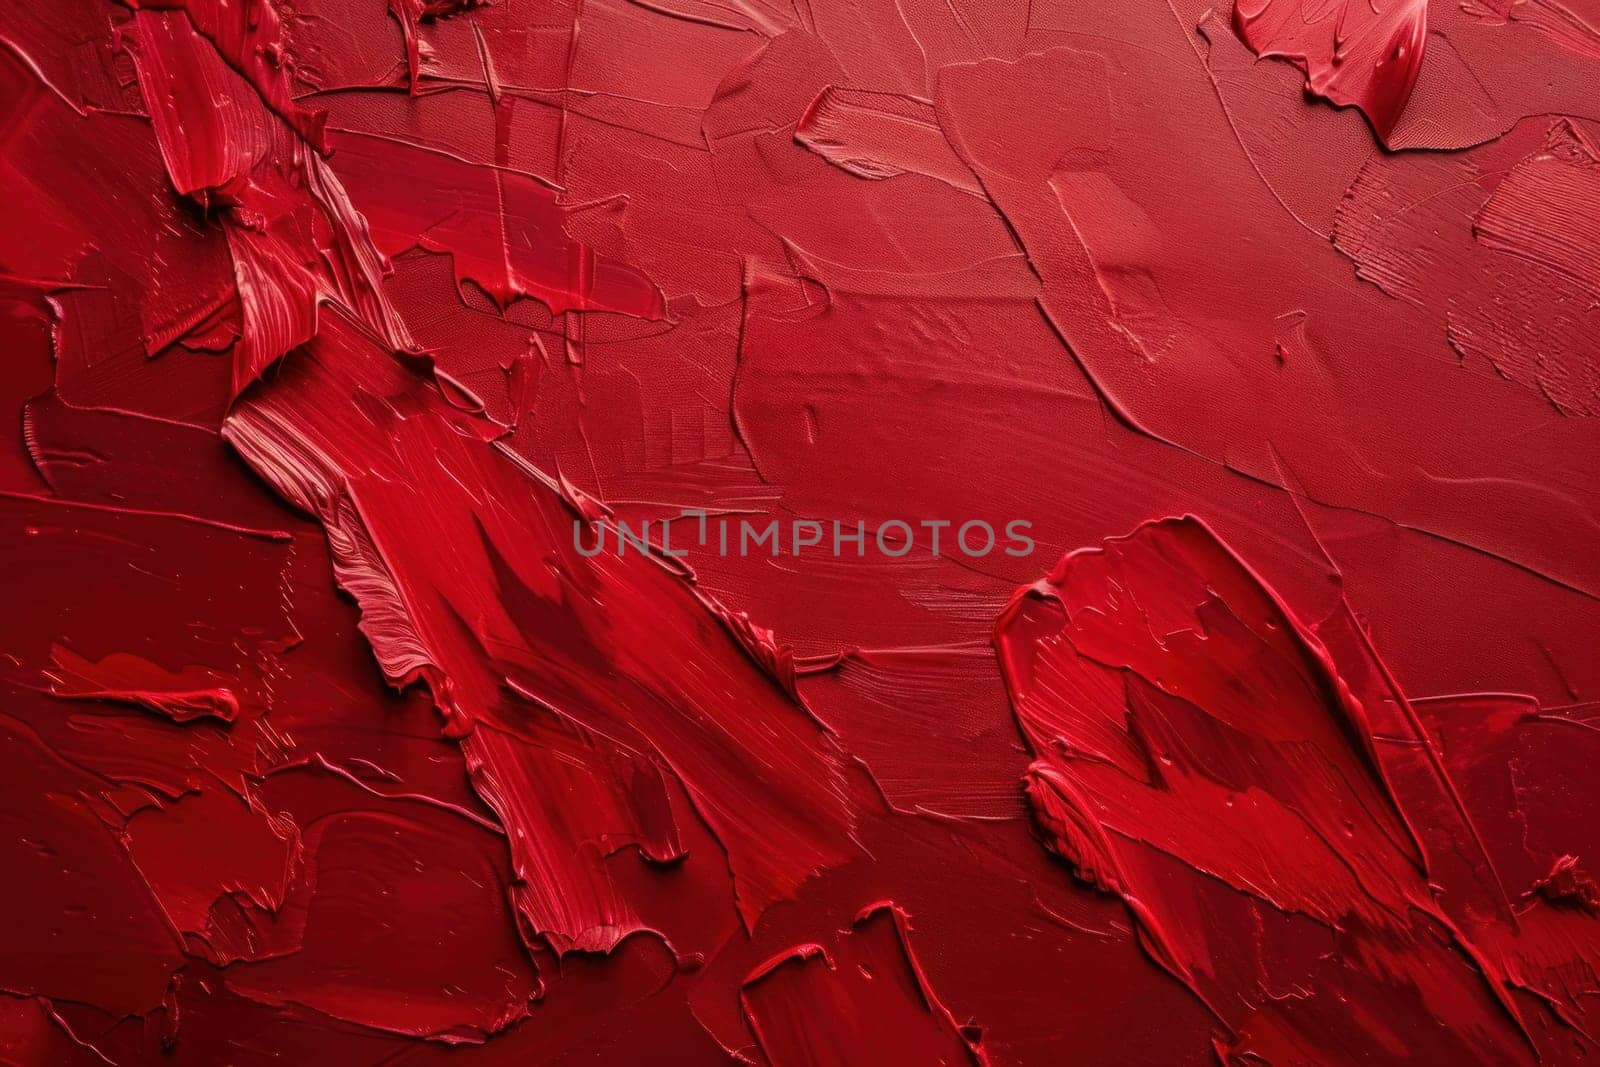 Abstract red paint splatter art on wall background for creative design projects and artistic inspiration